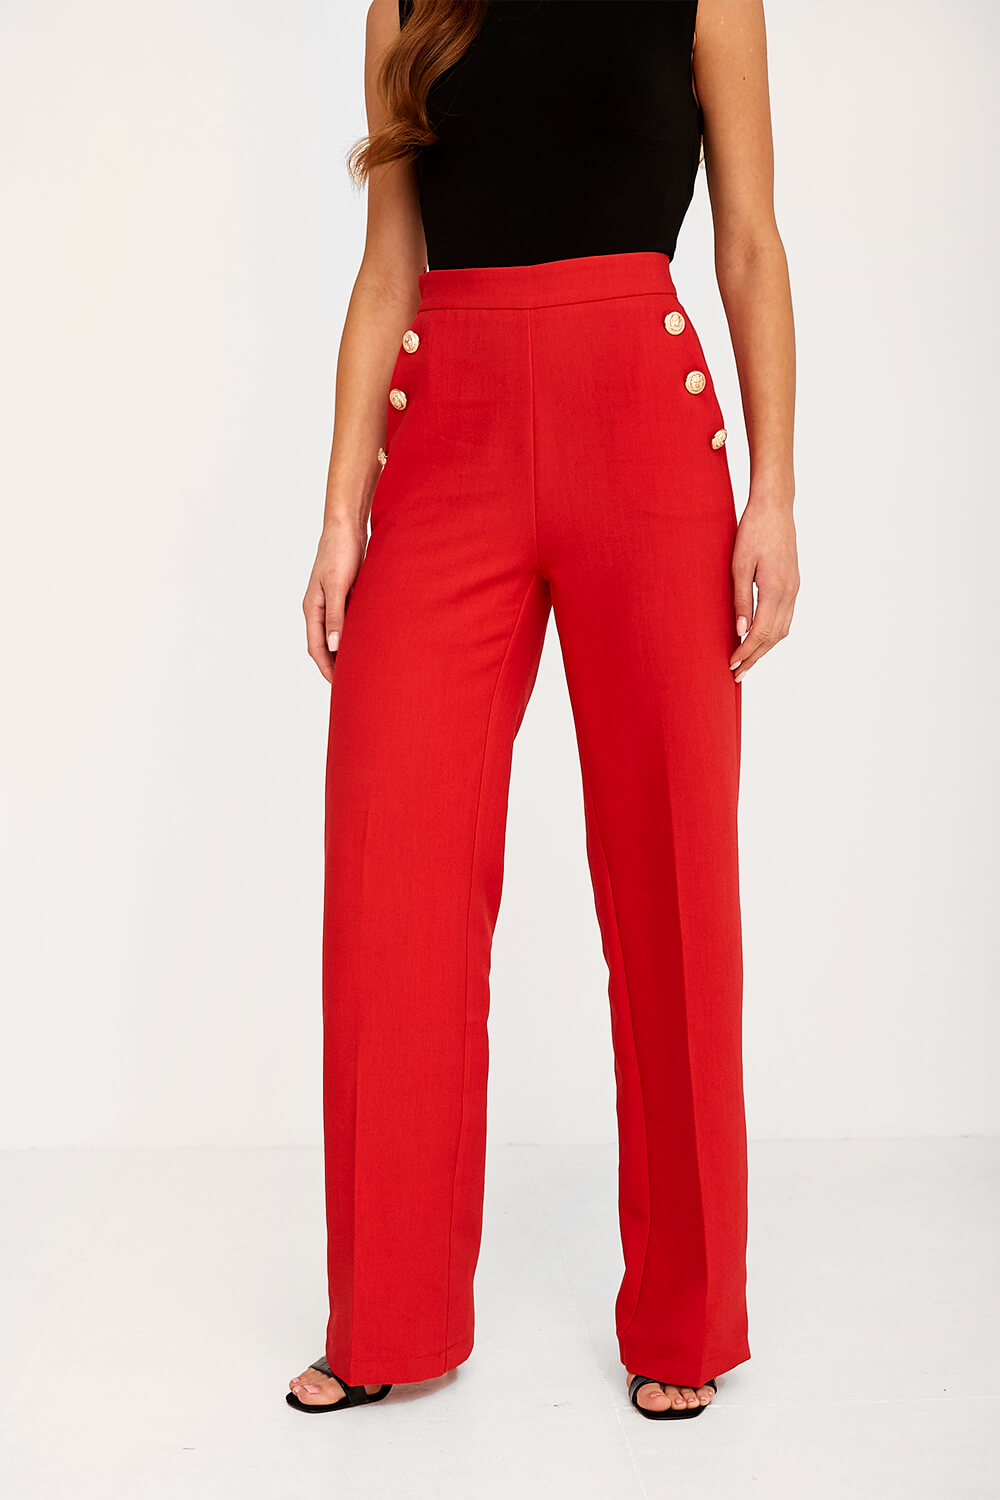 Retro Style Red High Waist Wide Leg Sailor Pants ($48) ❤ liked on Polyvore  featuring pants, red, white high wa…